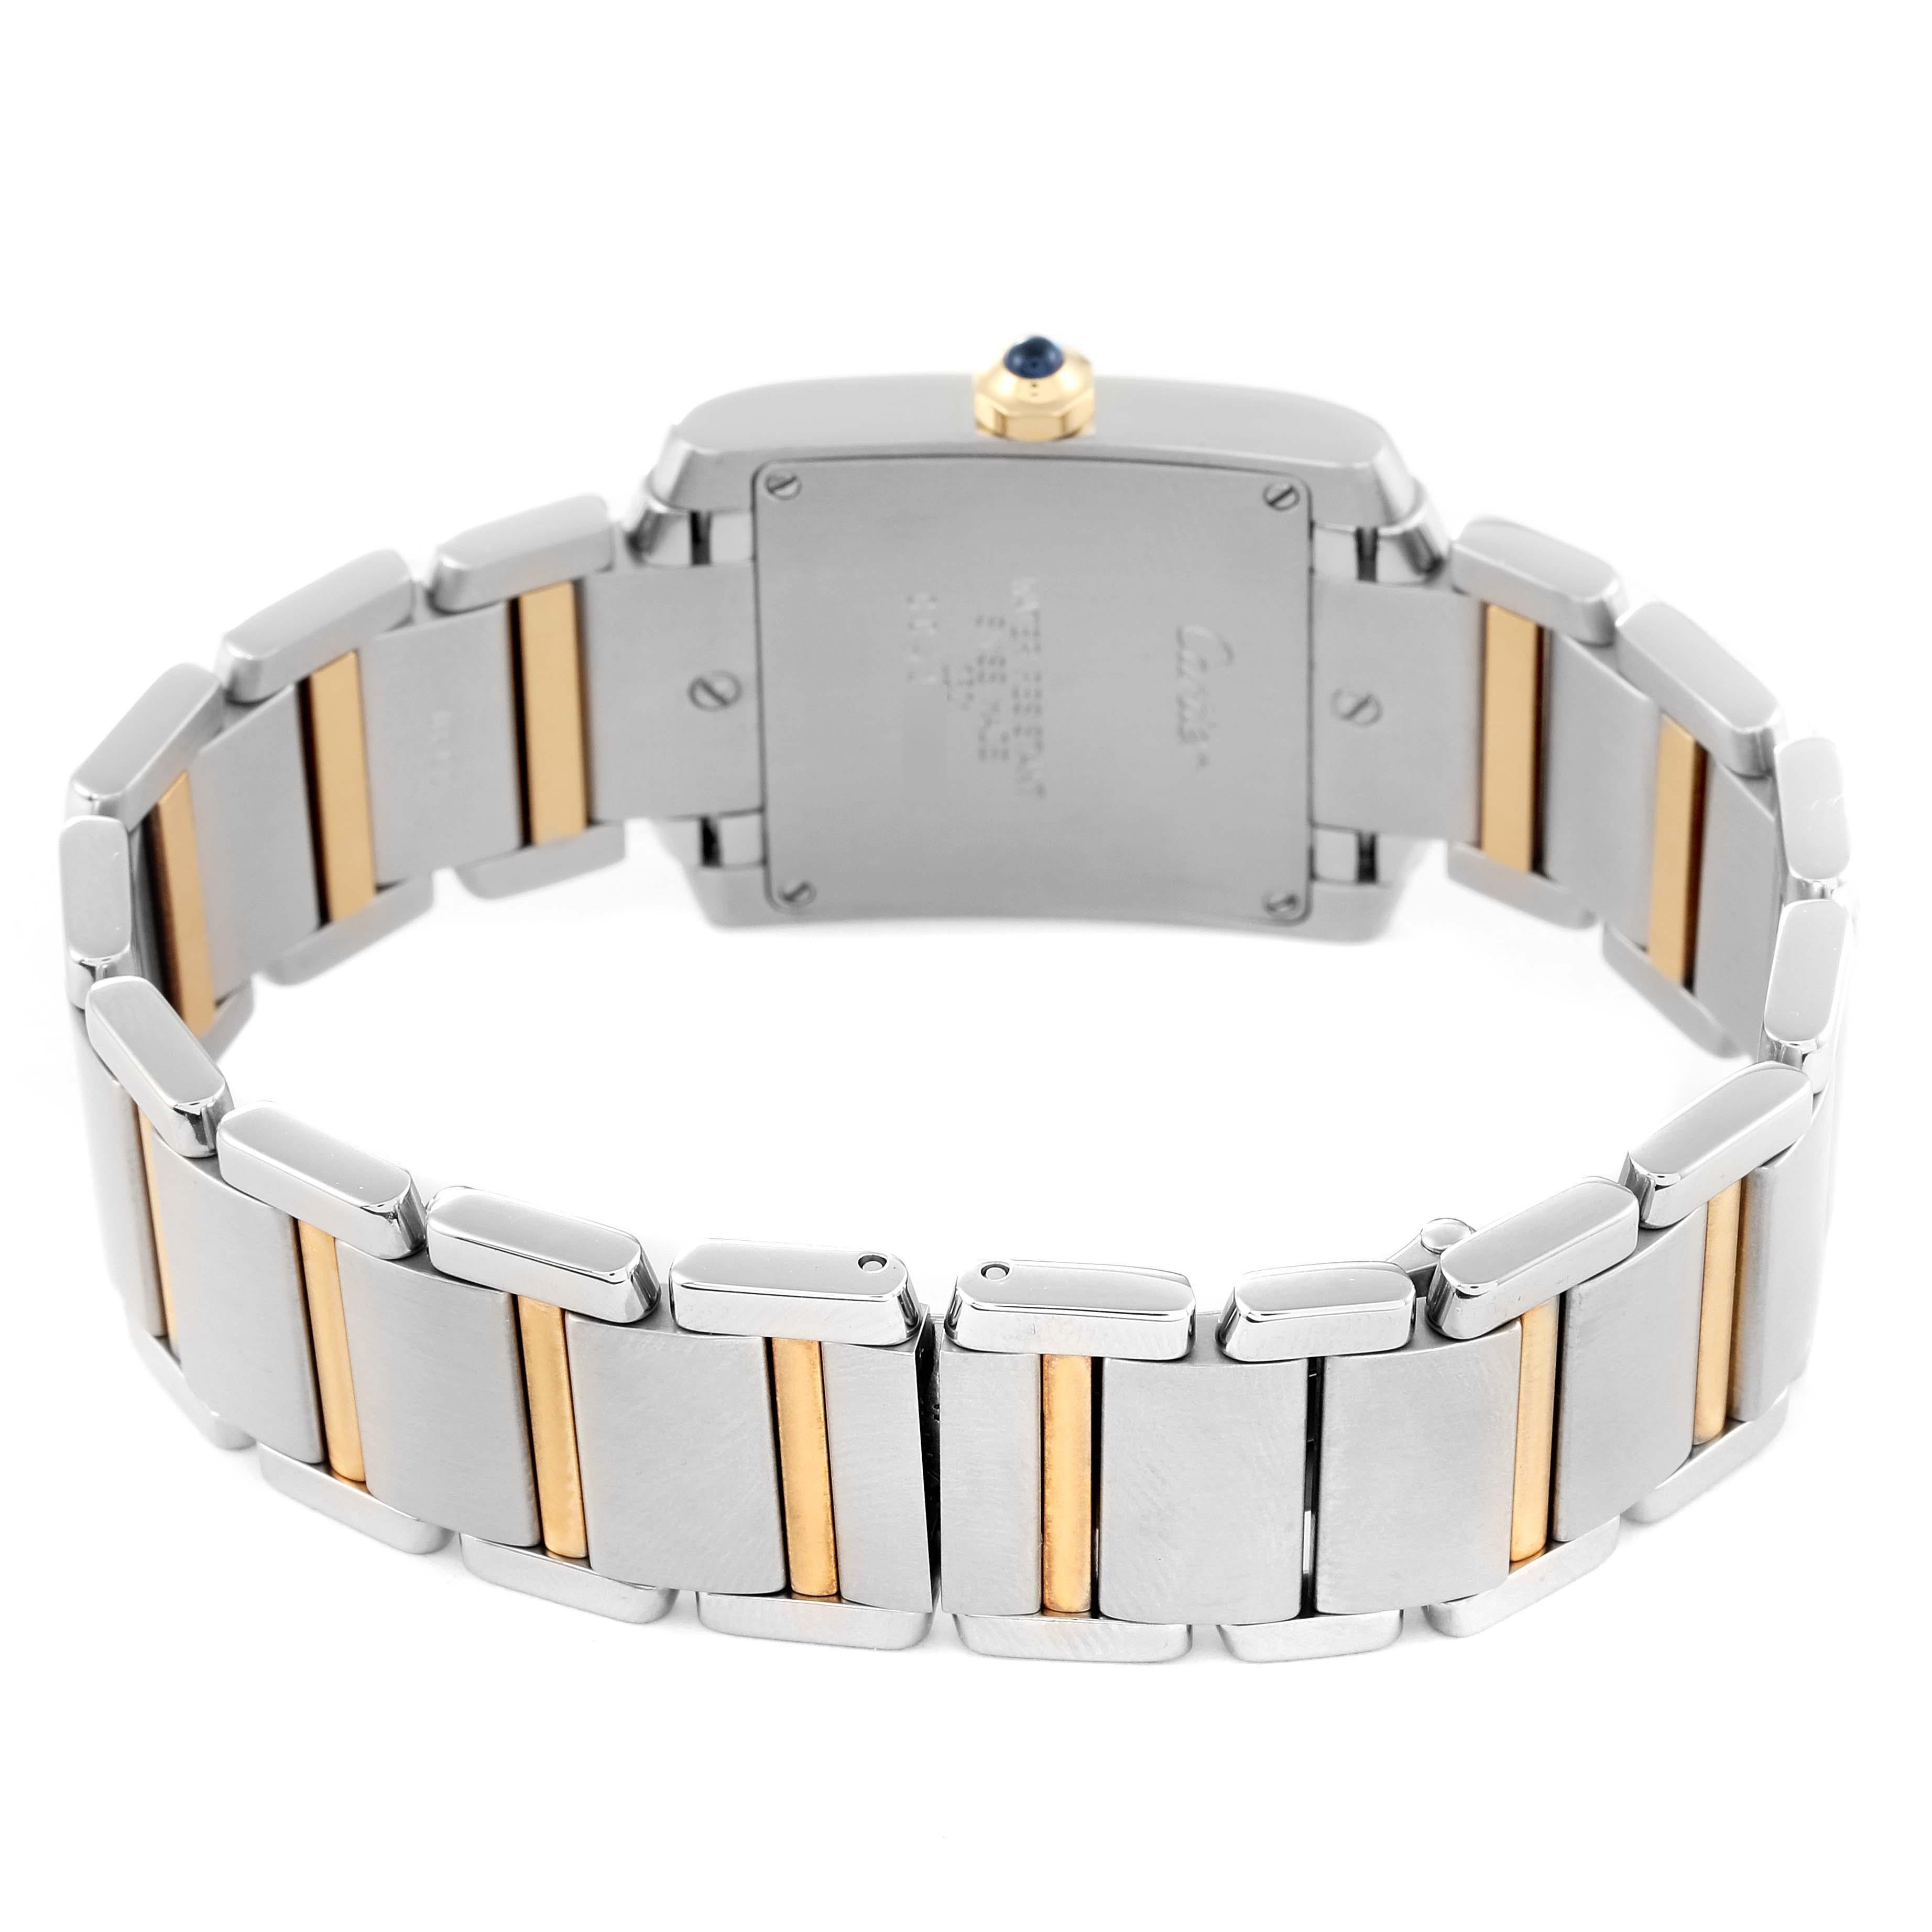 Cartier Tank Francaise Steel Yellow Gold Mens Watch W51006Q4 Box Papers 3